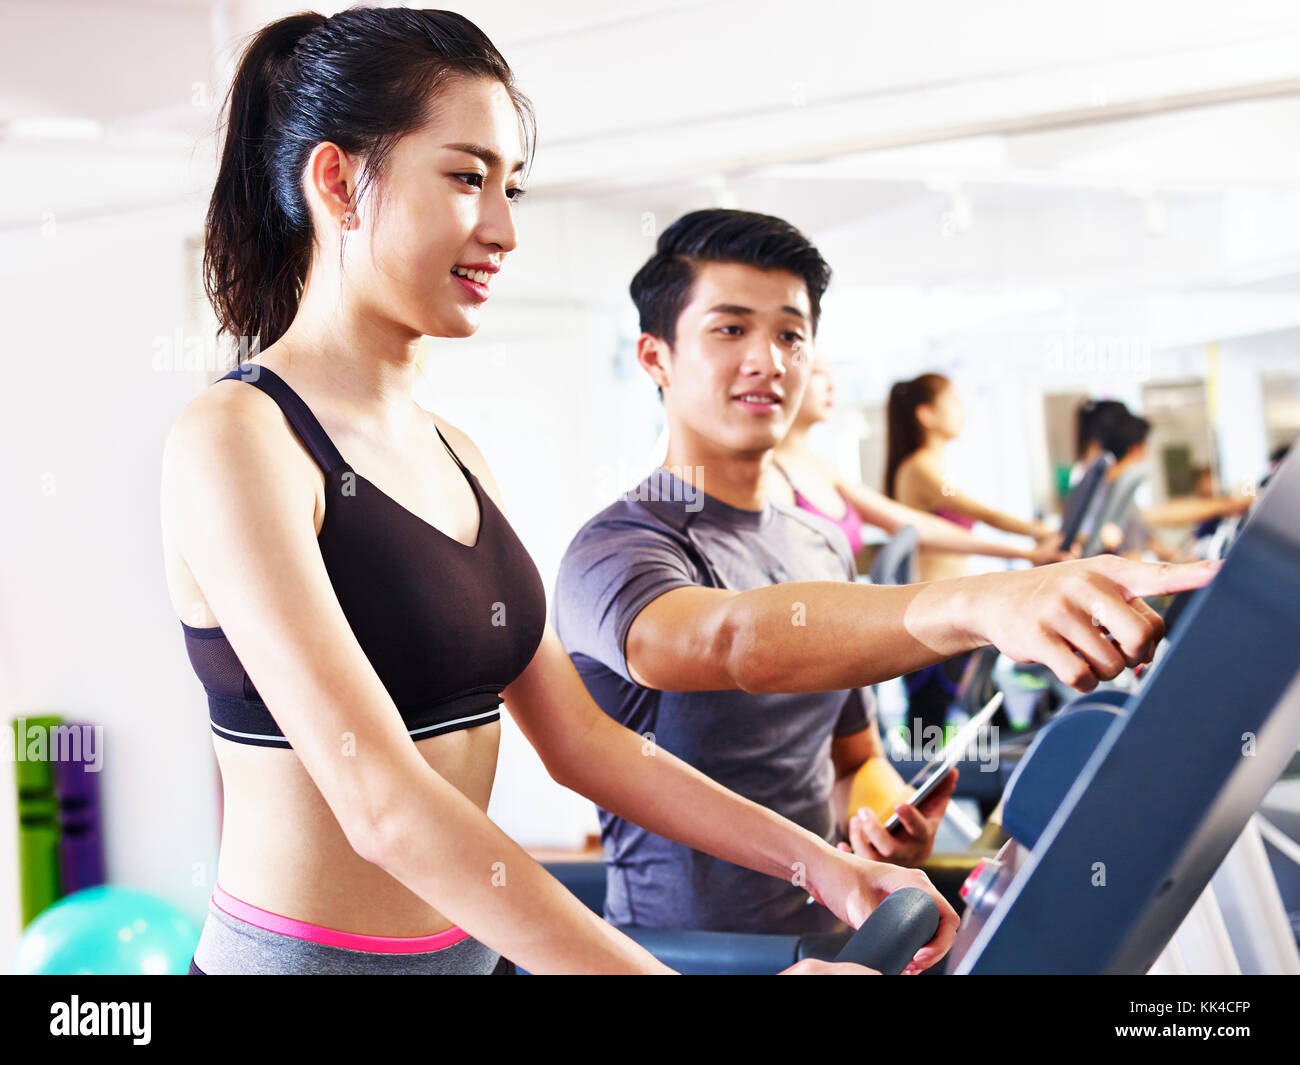 young asian woman running on treadmill coached by young male trainer. Stock Photo